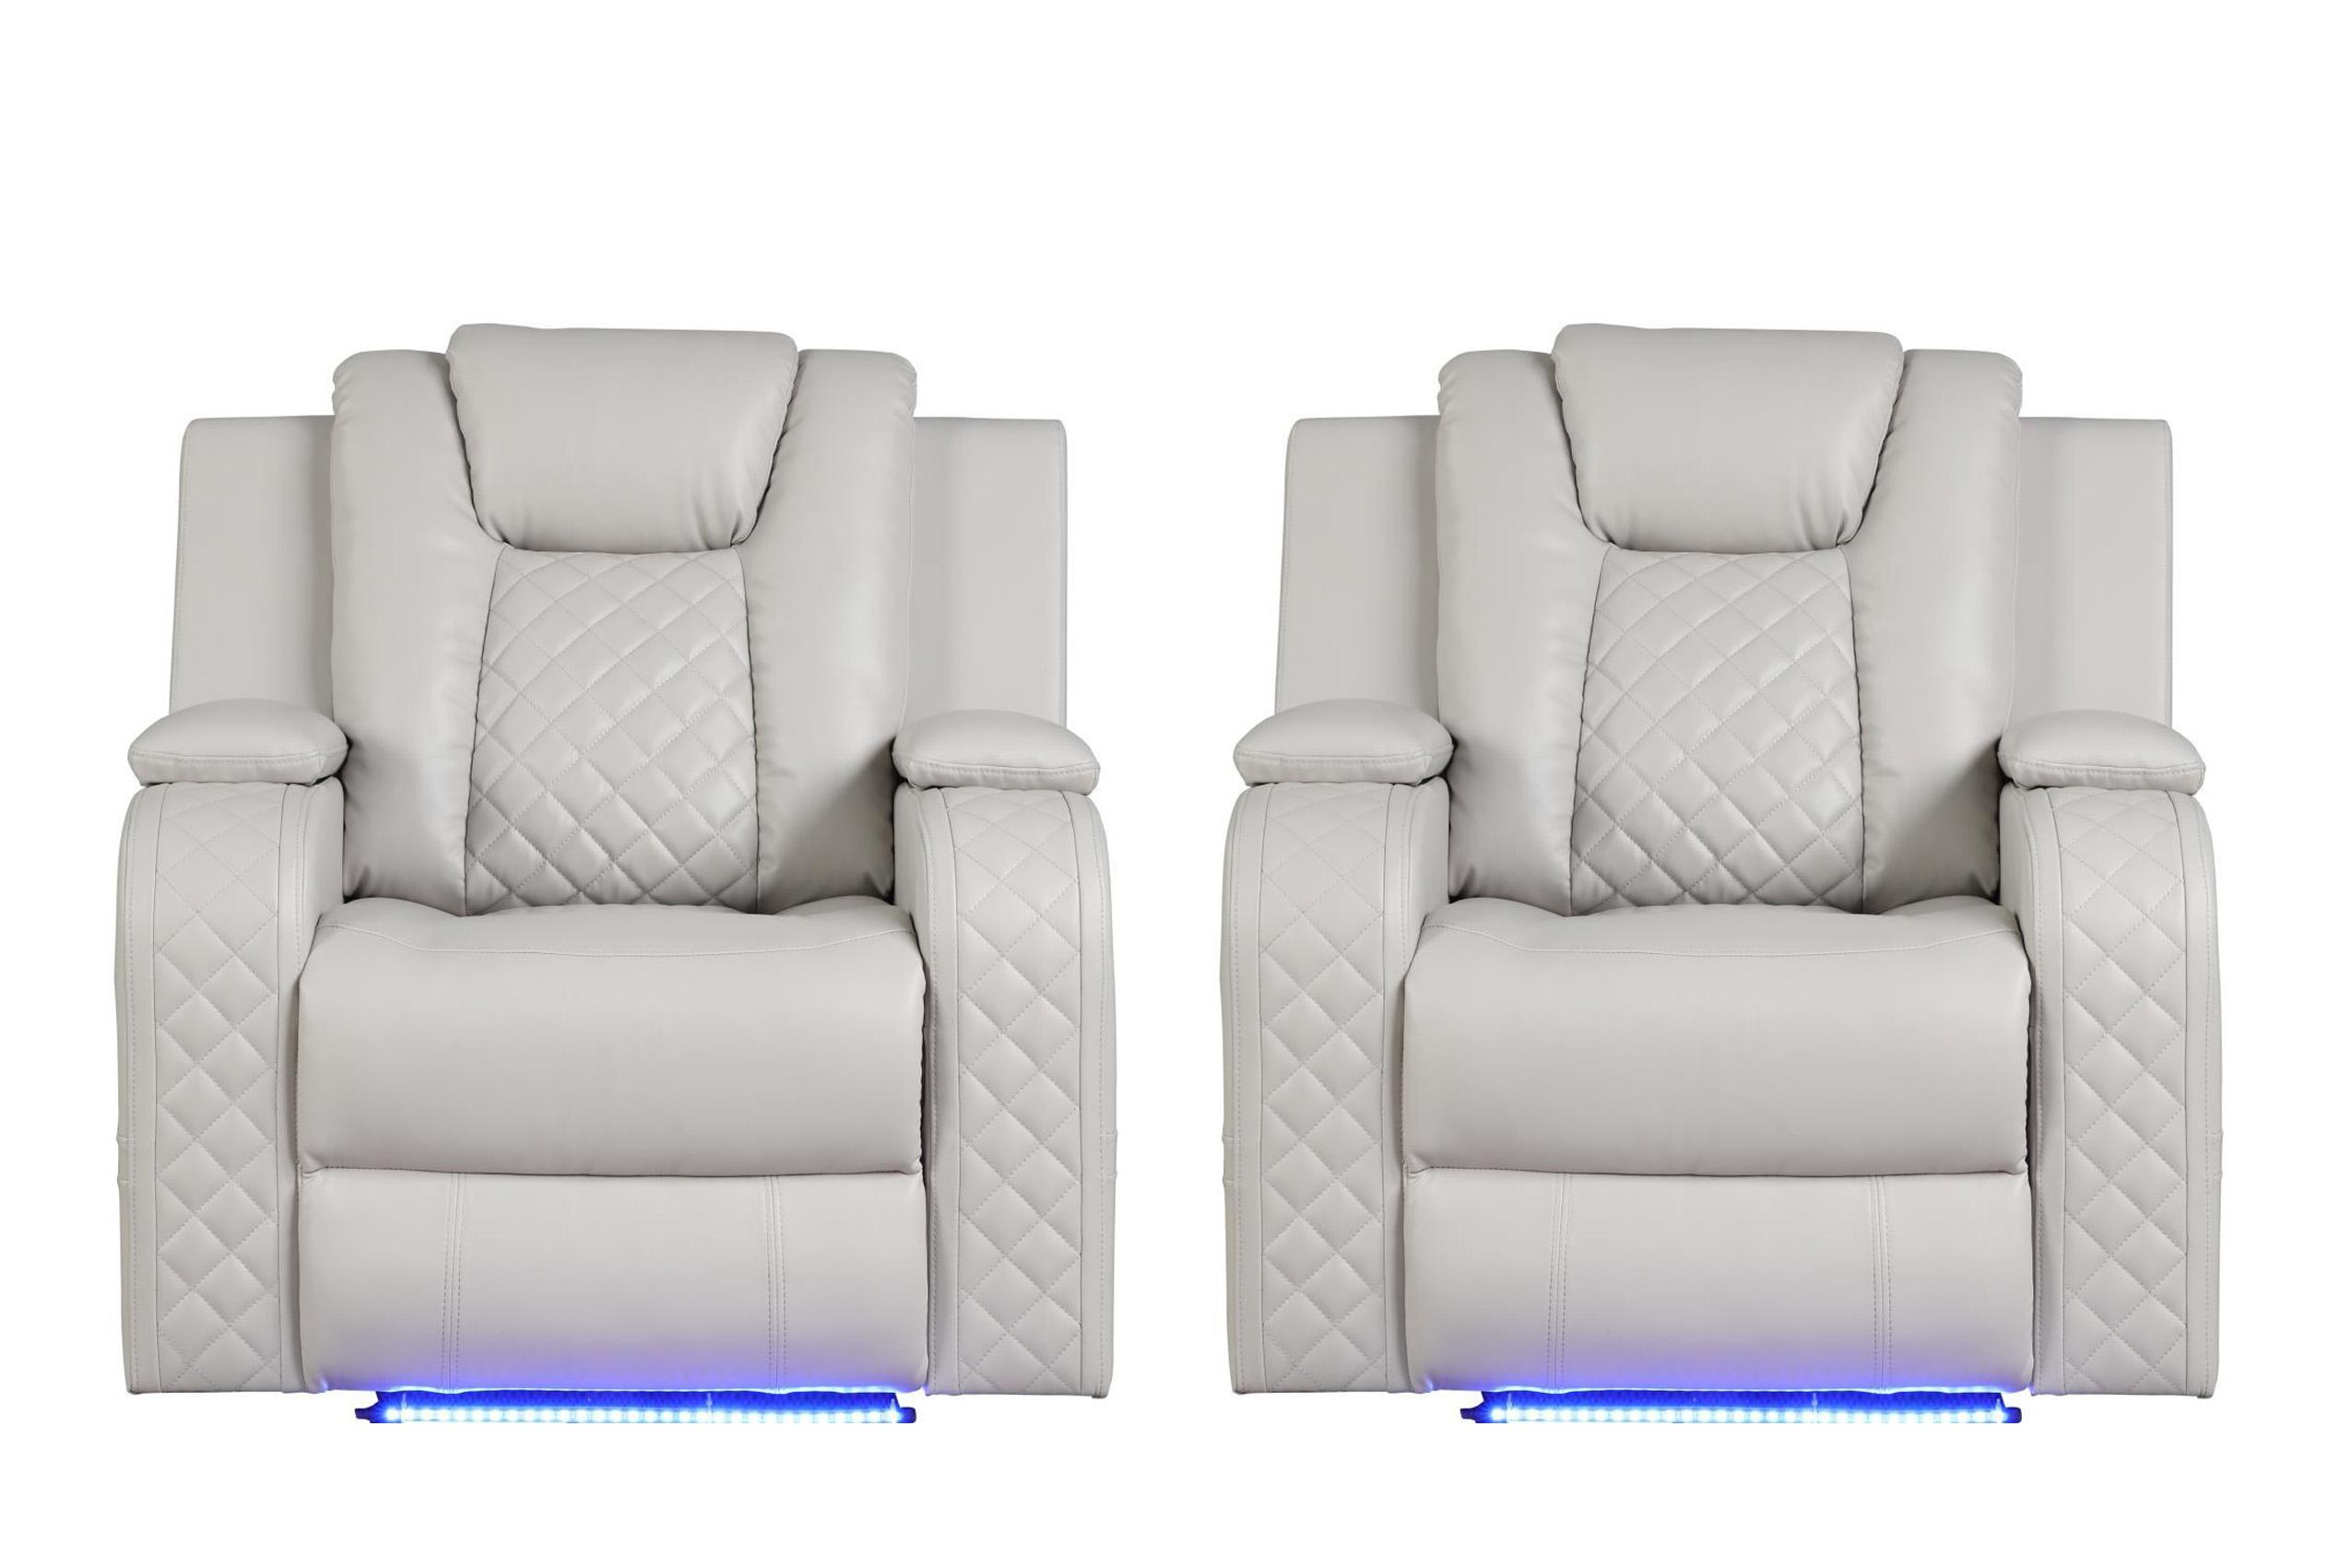 Contemporary, Modern Recliner Chair Set BENZ 659436190283-2PC in White Faux Leather